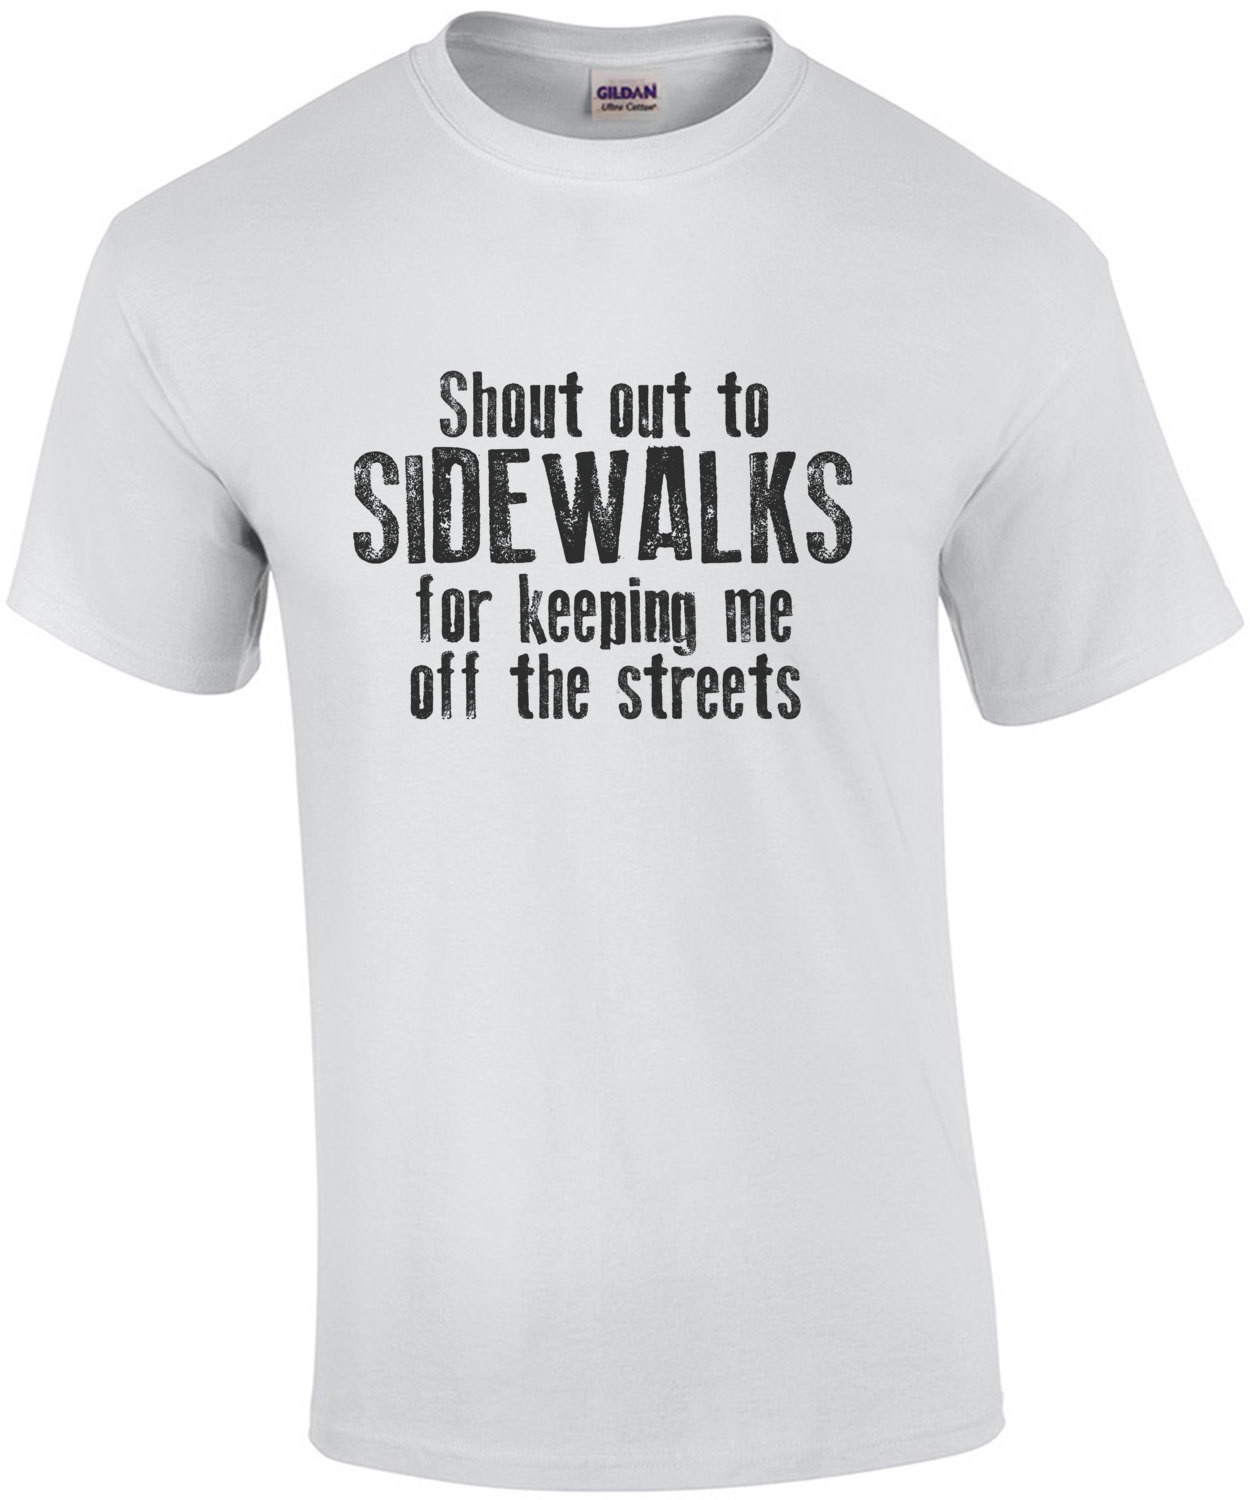 Shout out to sidewalks for keeping me off the streets - funny pun t-shirt